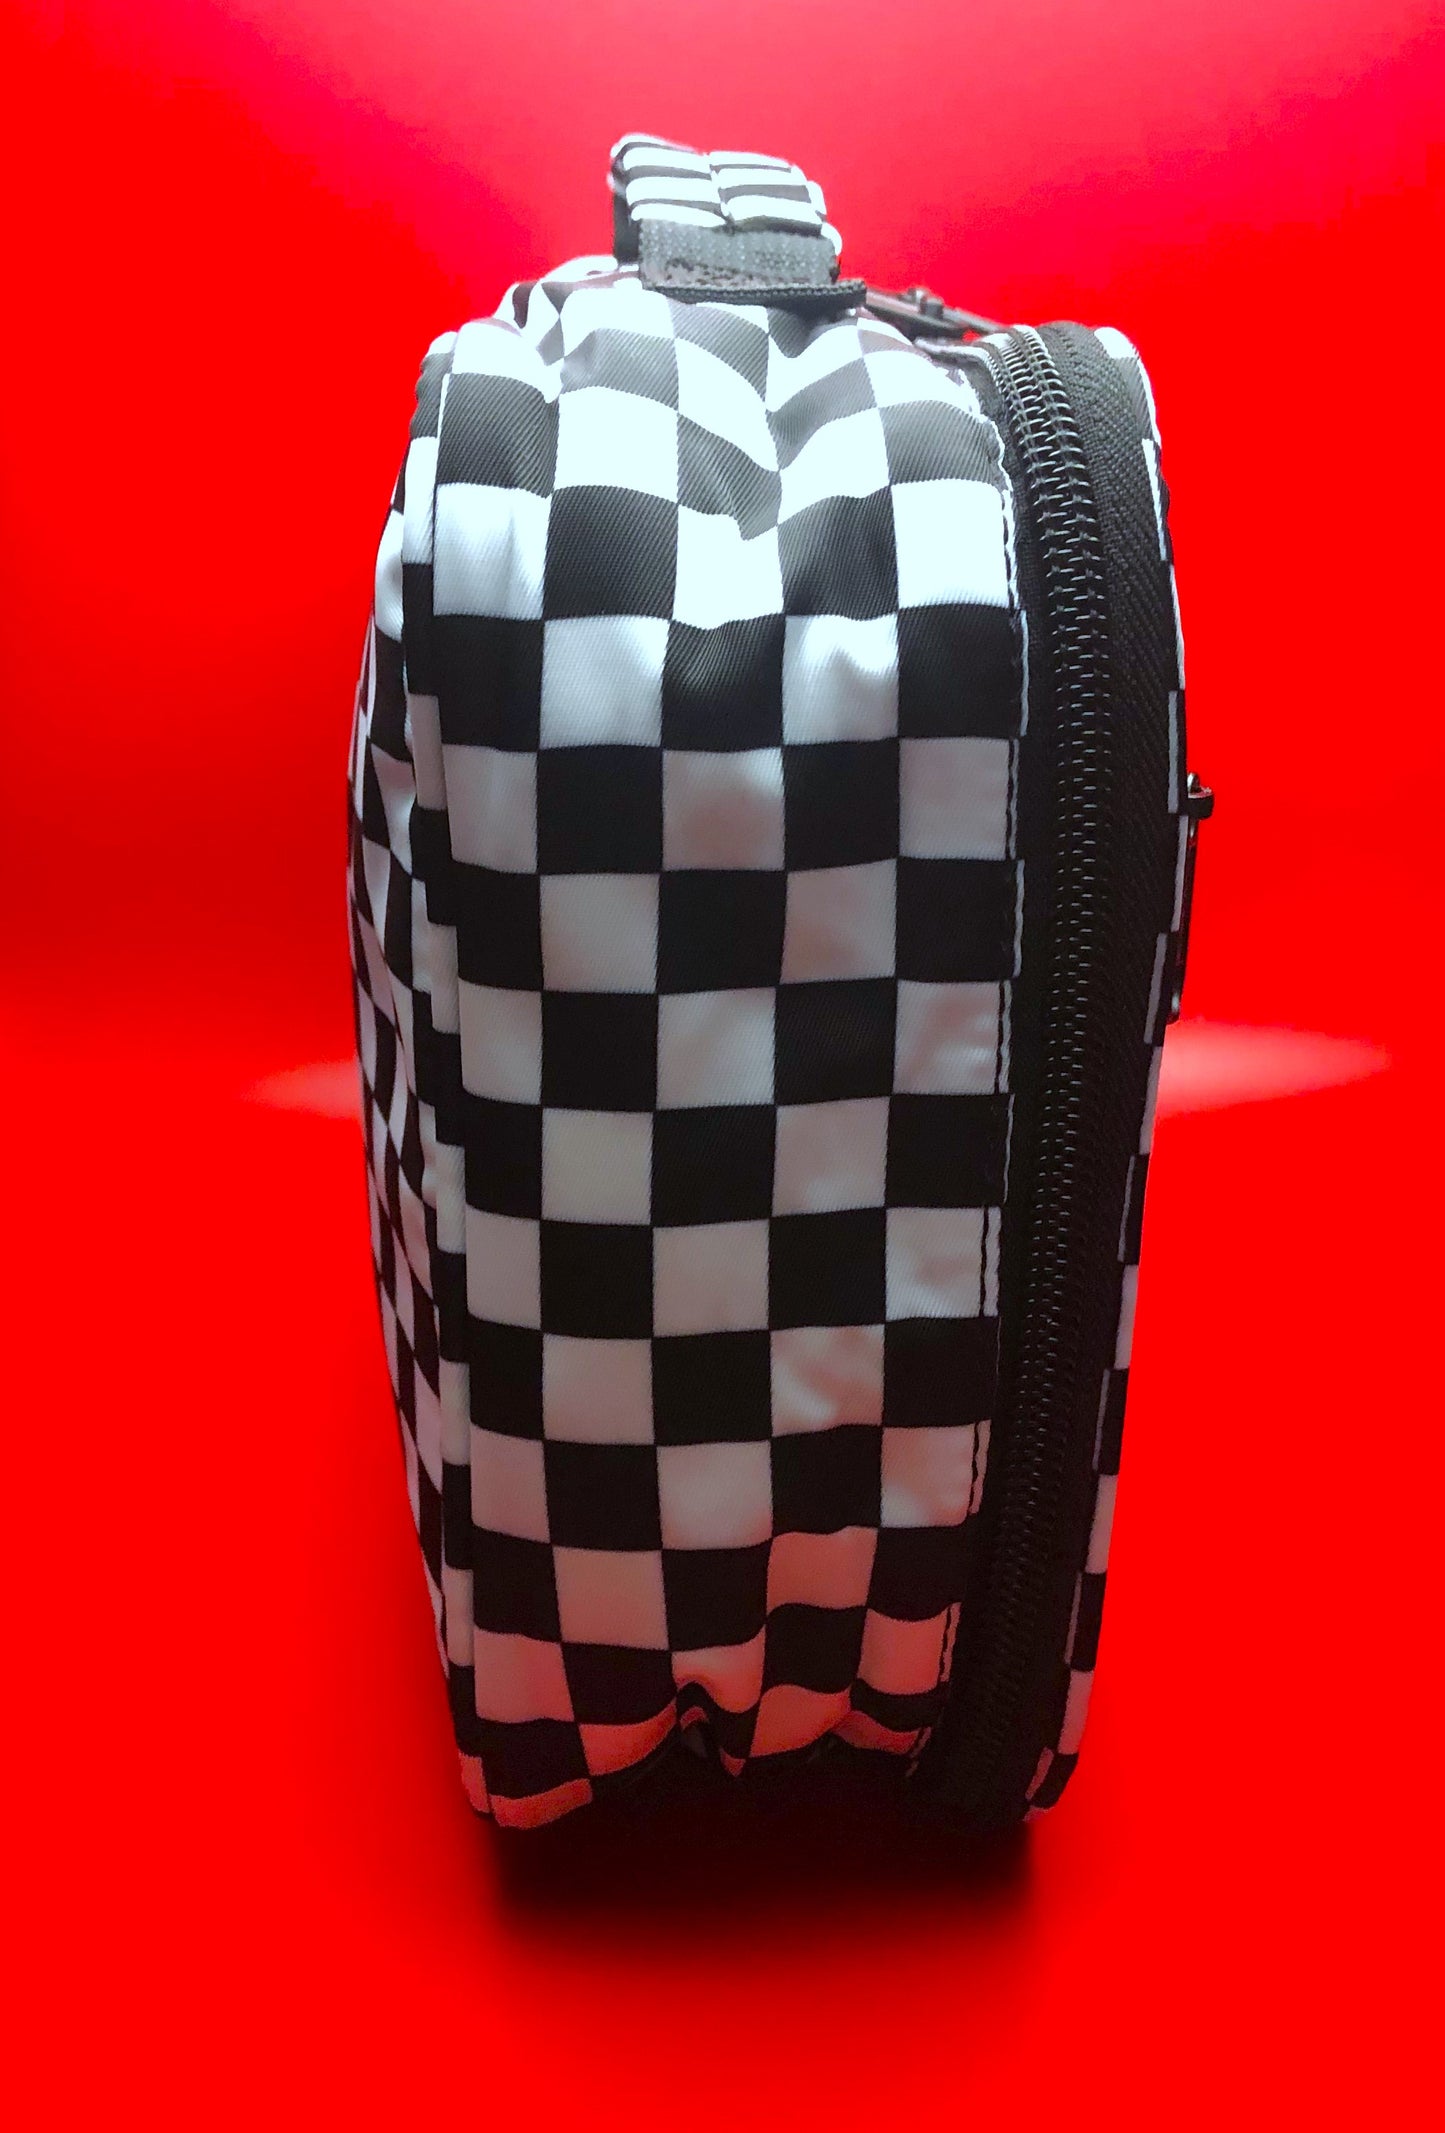 Black and White Checkered Lunch Box